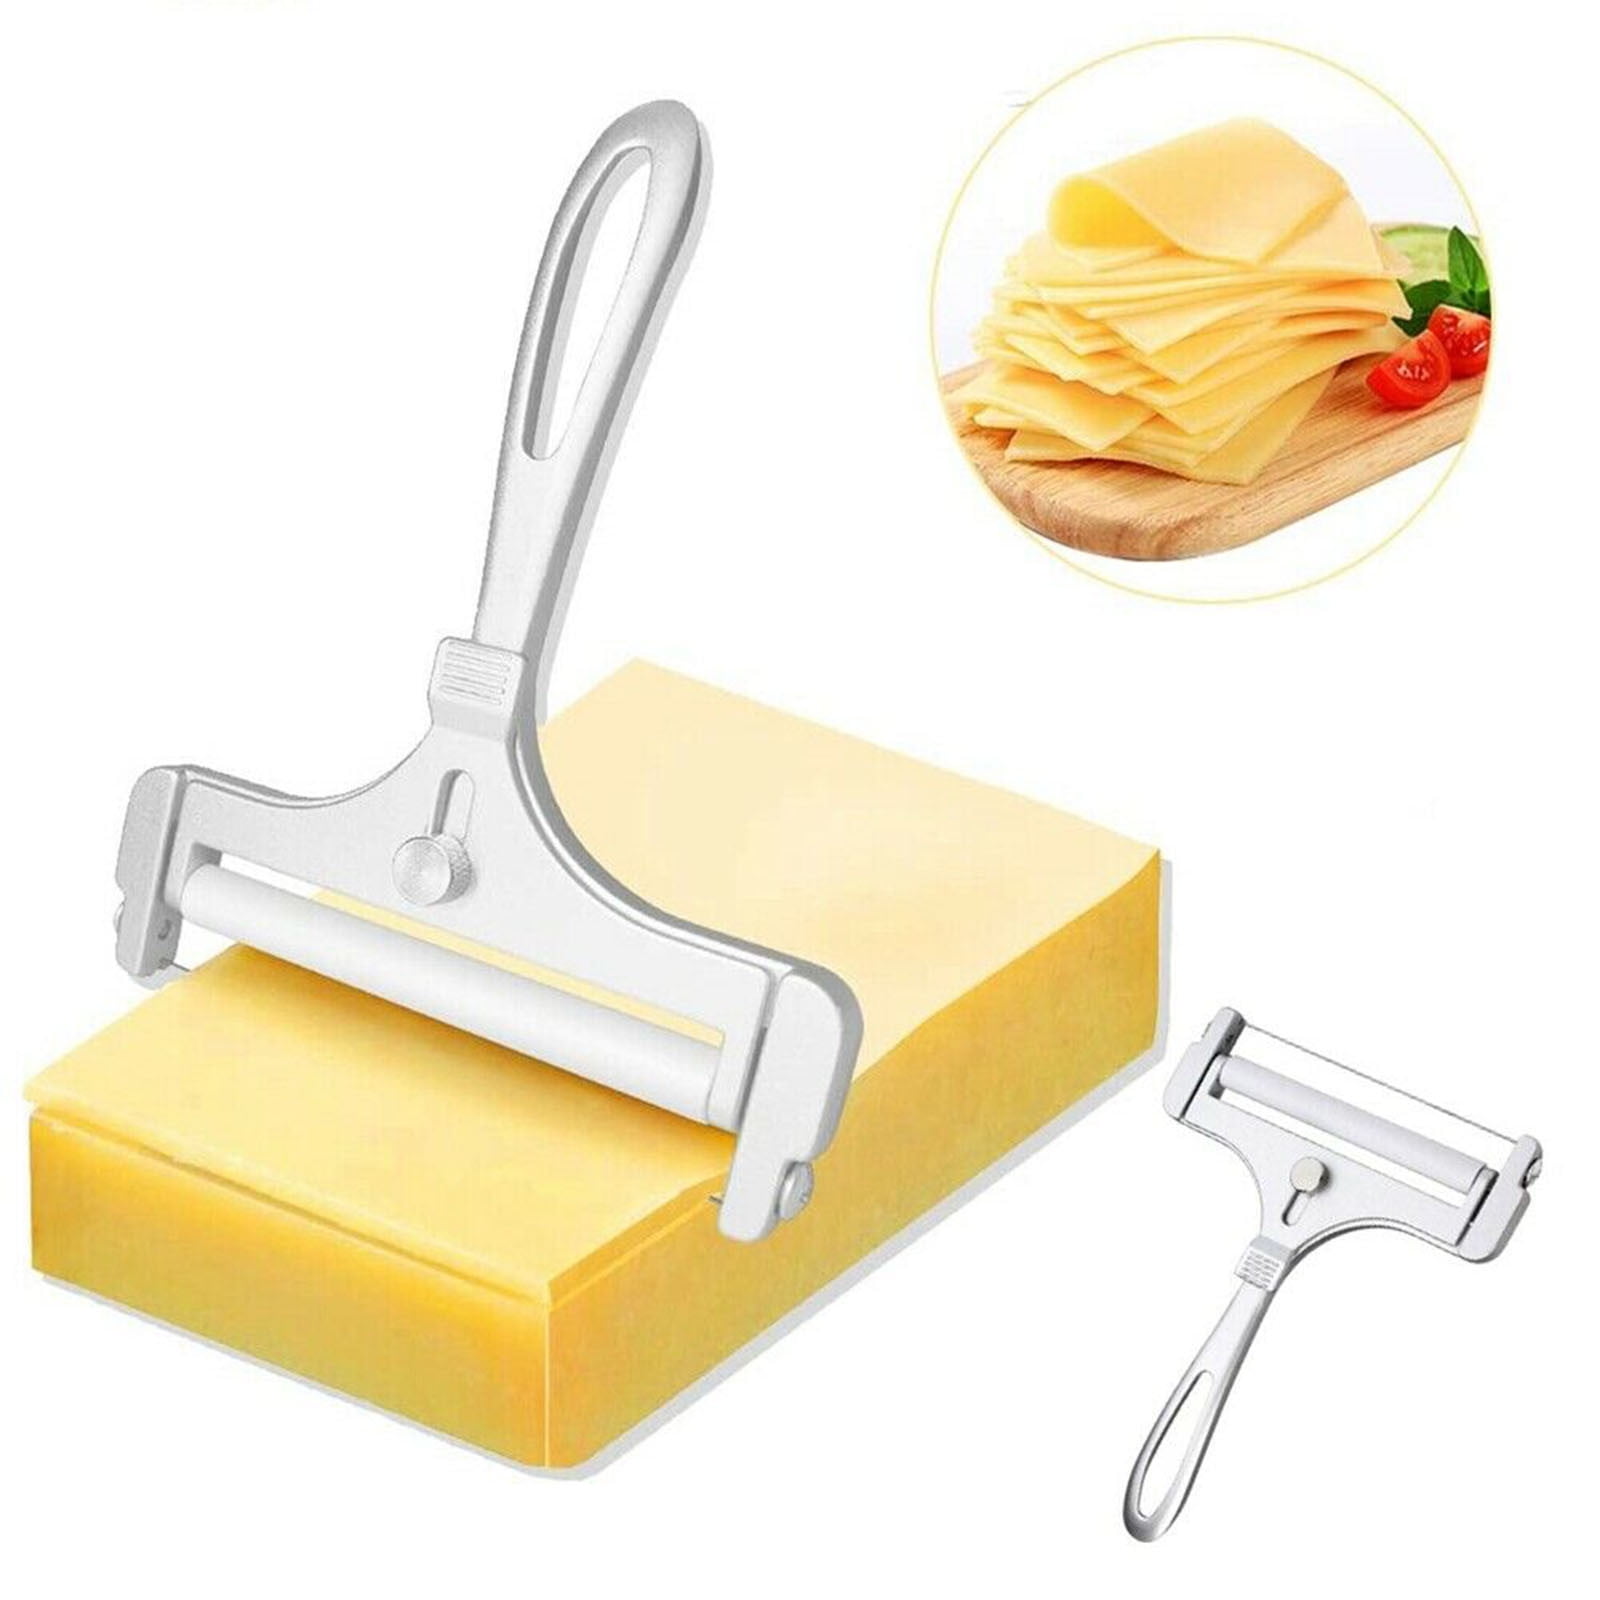 Lieonvis Cheese Slicer With Adjustable Thickness - Wire Cheese Slicer For  Mozzarella Cheese,Cheddar Cheese,Gouda Cheese - Cheese Slicers For Block